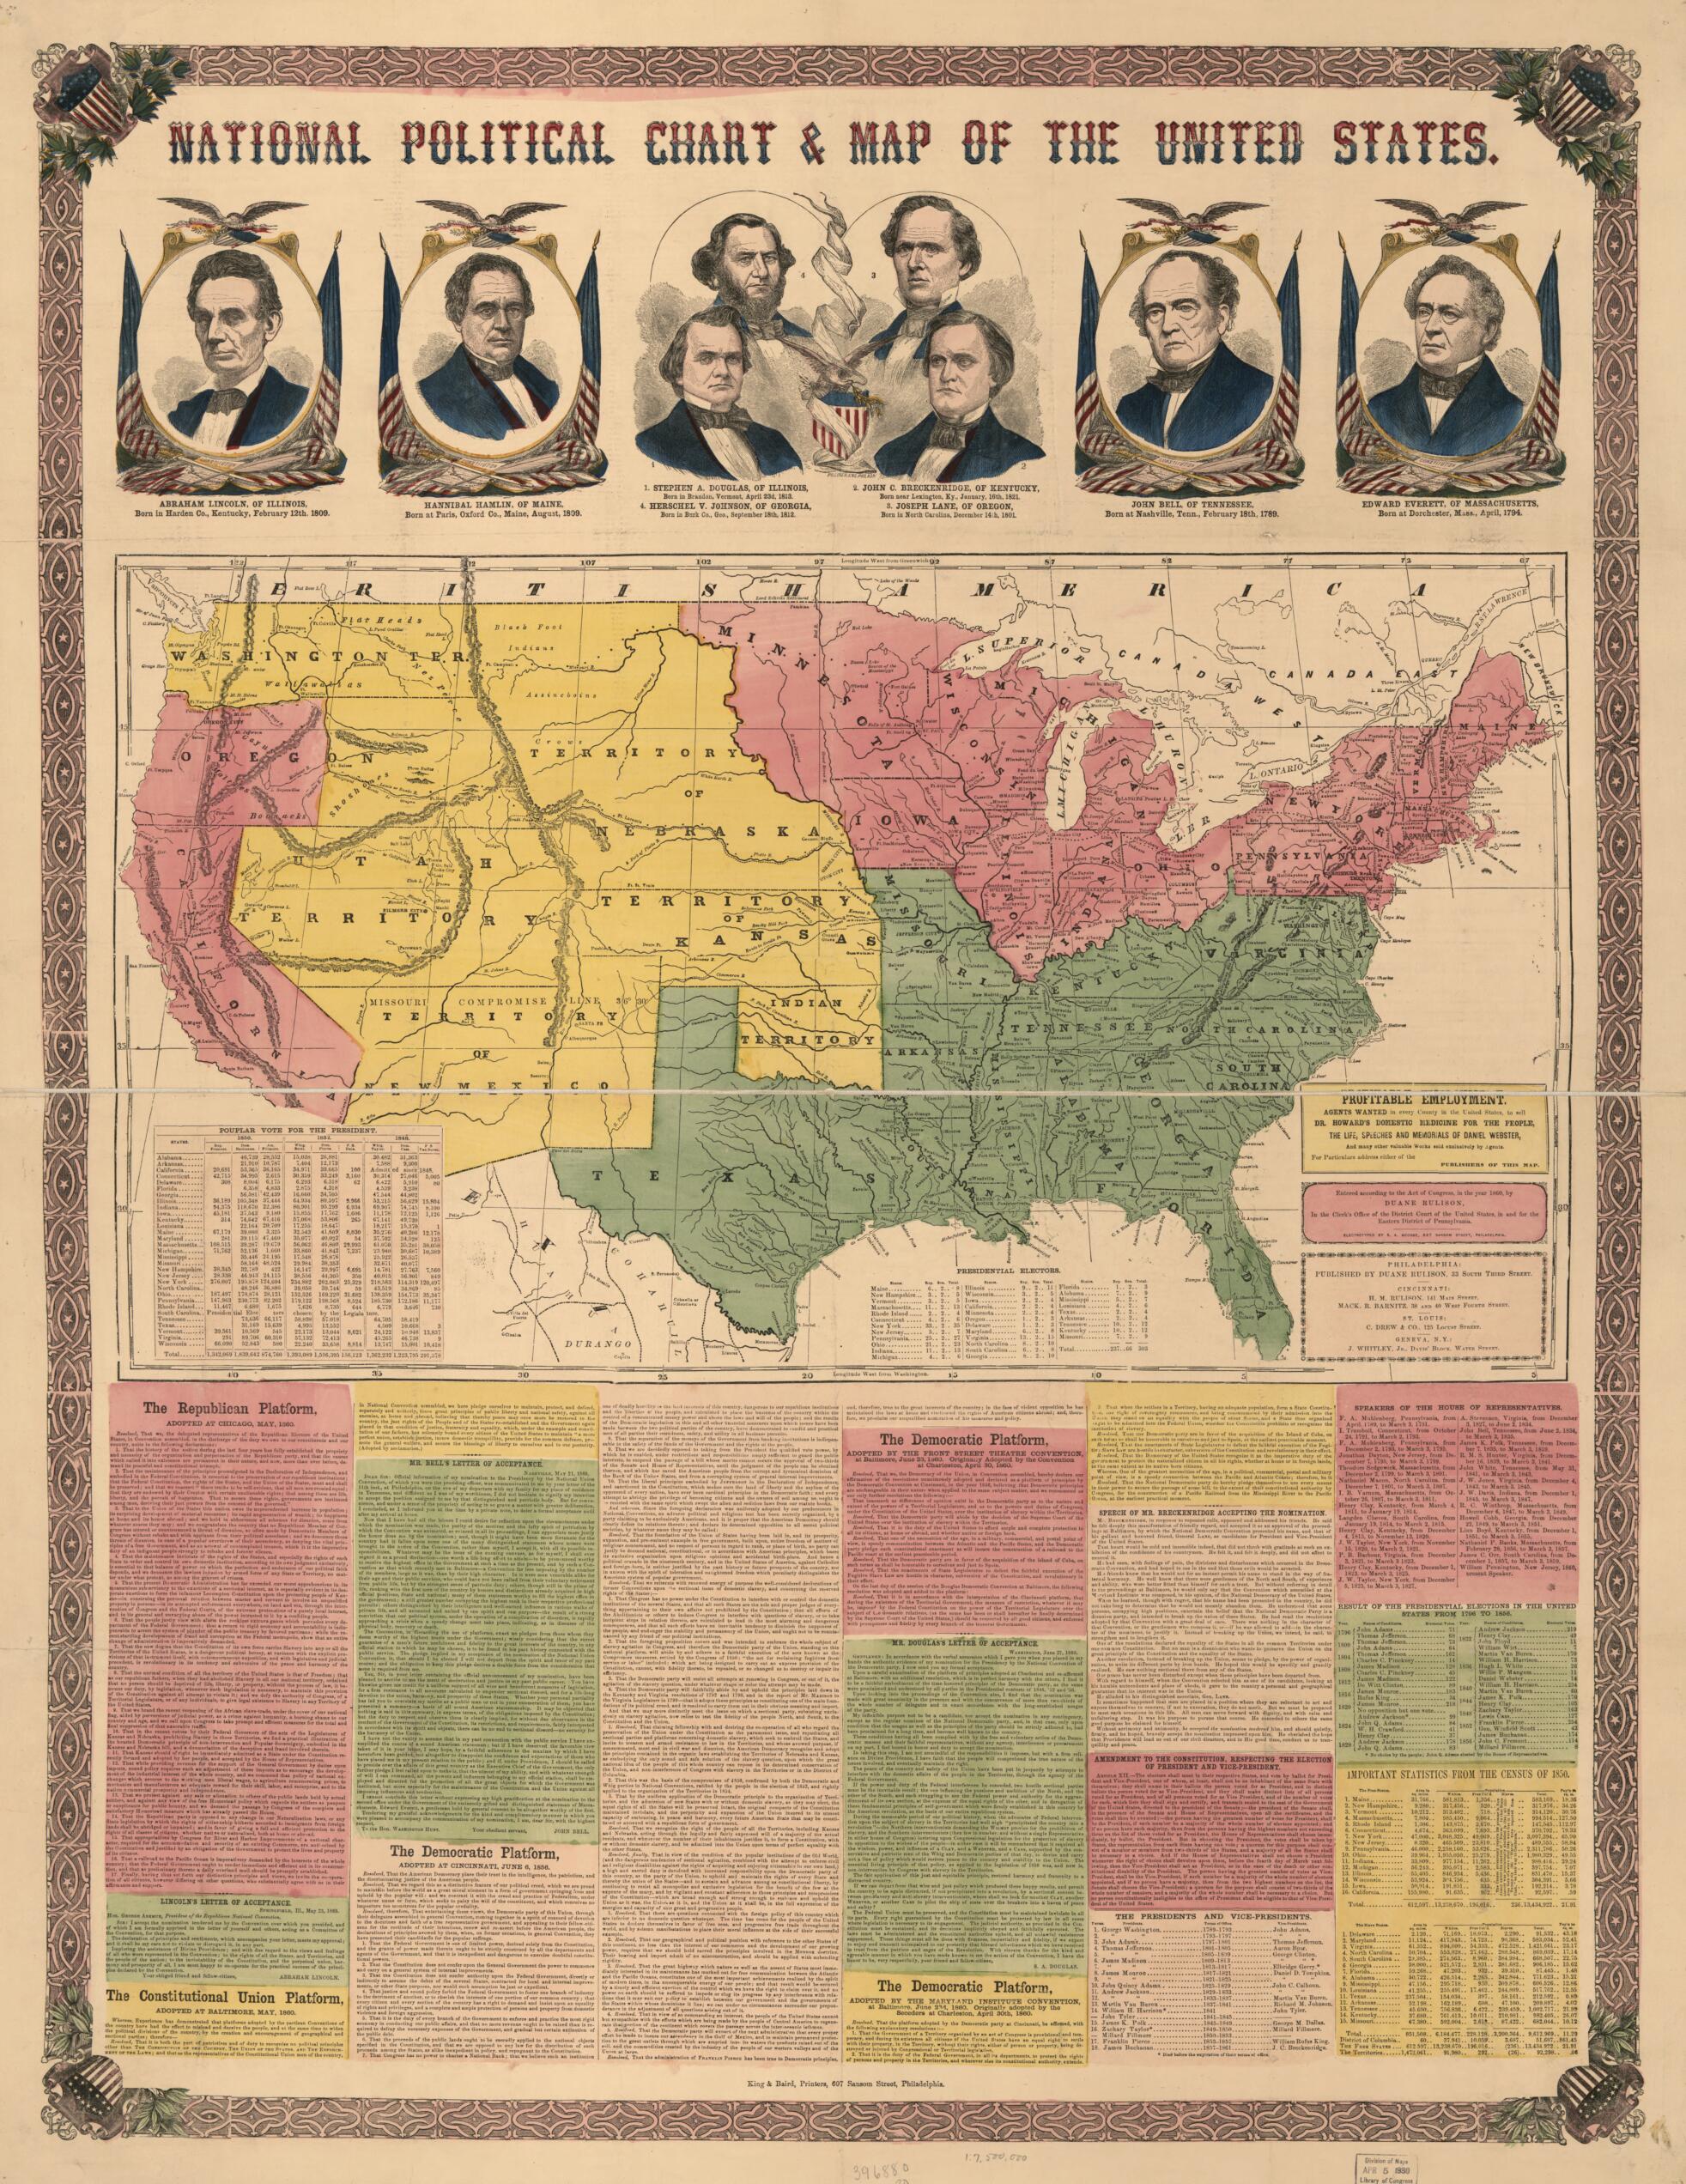 This old map of National Political Chart &amp; Map of the United States from 1860 was created by  King &amp; Baird, Duane Rulison in 1860